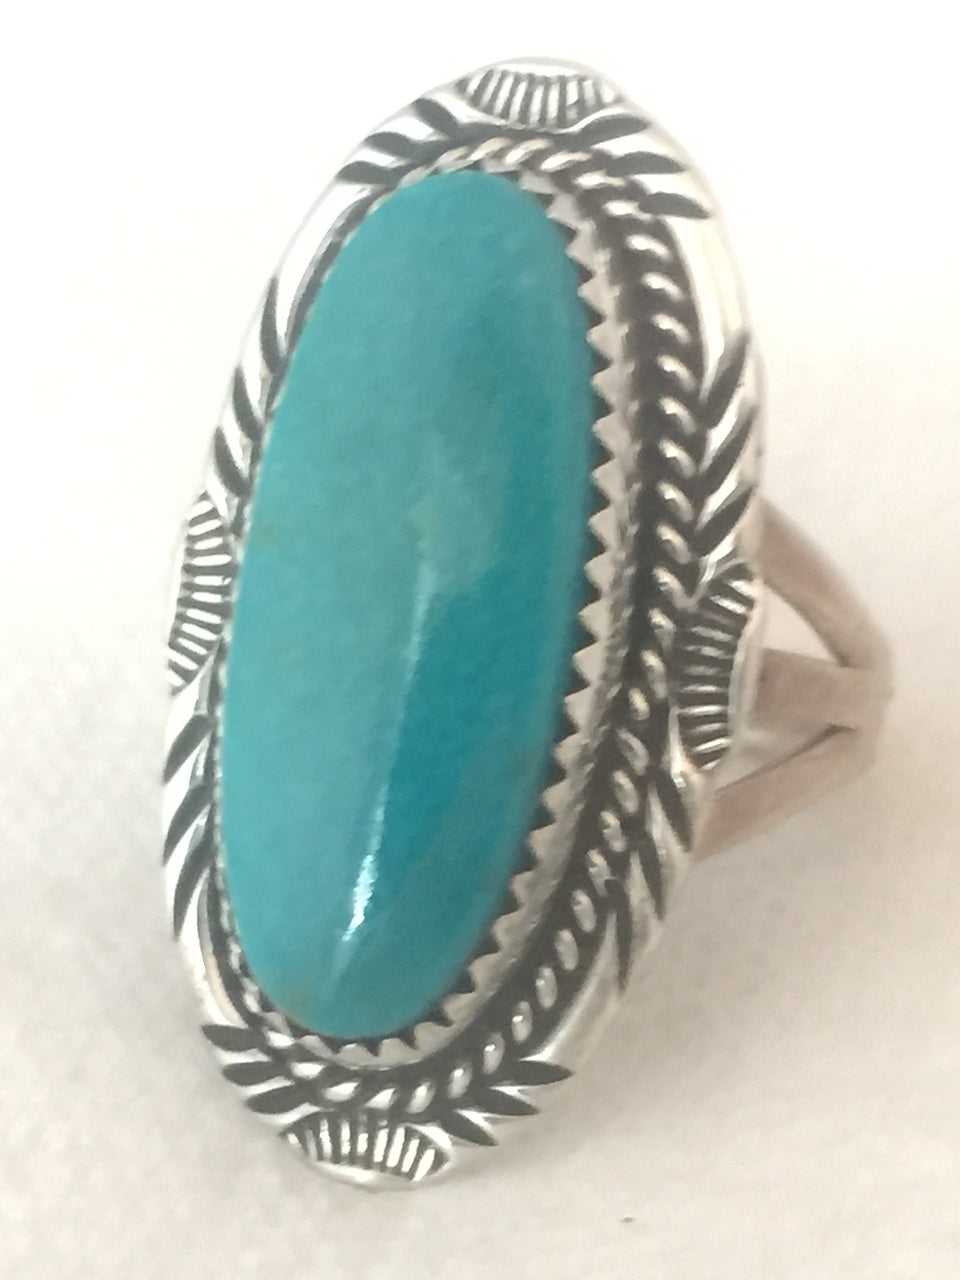 Navajo Turquoise Ring Vintage Native American Sterling Silver  Size 8.75